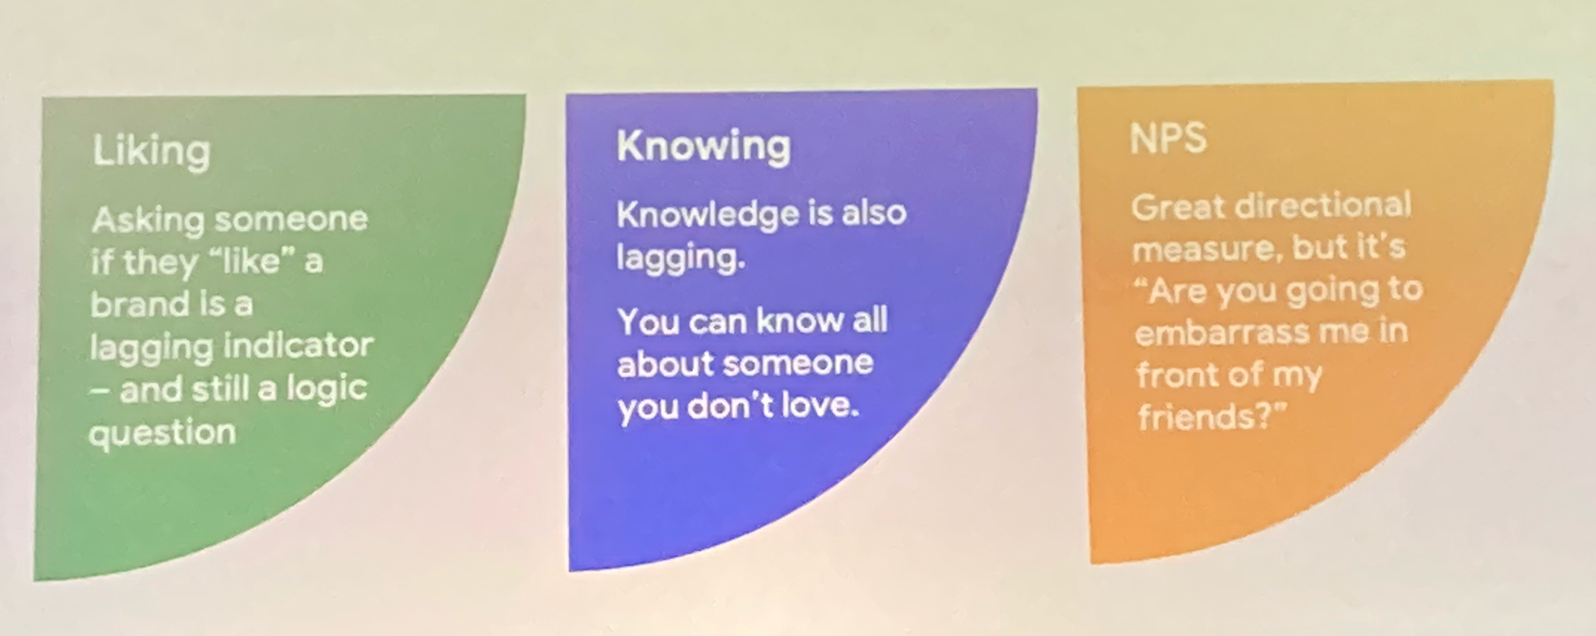 From Amanda Peterson's session on cultivating brand love